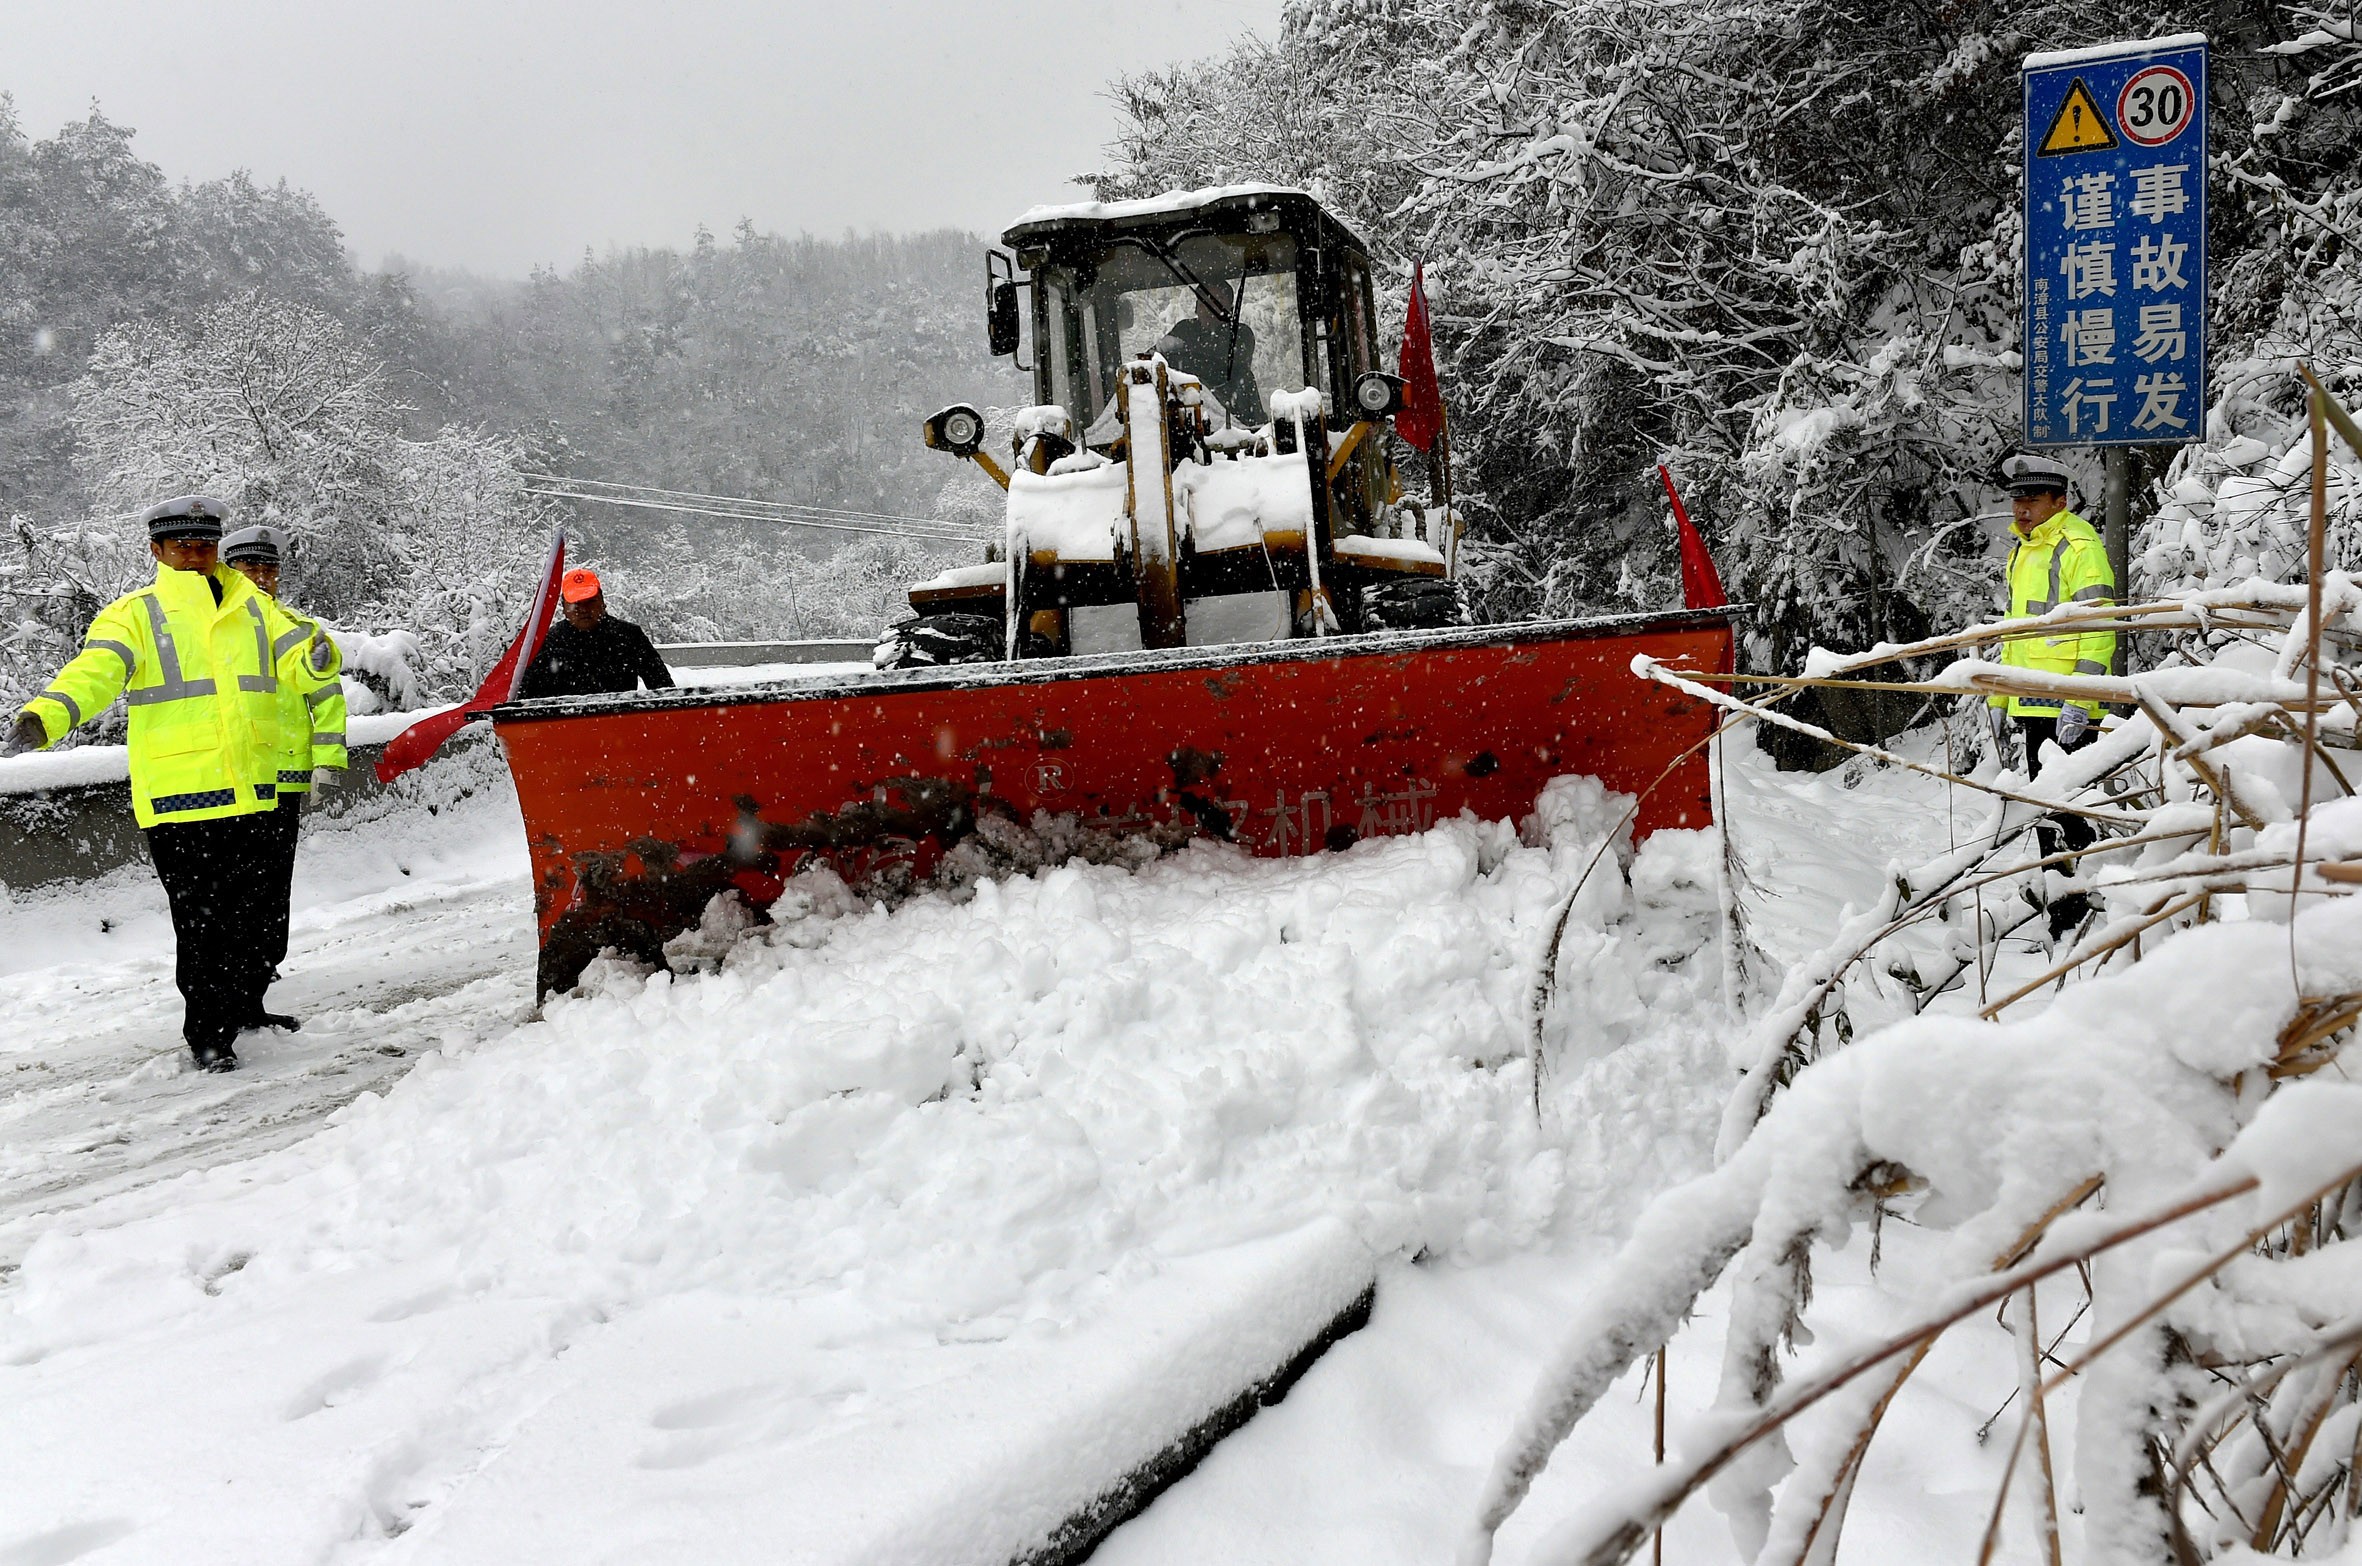 A snow grader clears a path on a dangerous road in Nanzhang county, Hubei province. Photo: Xinhua